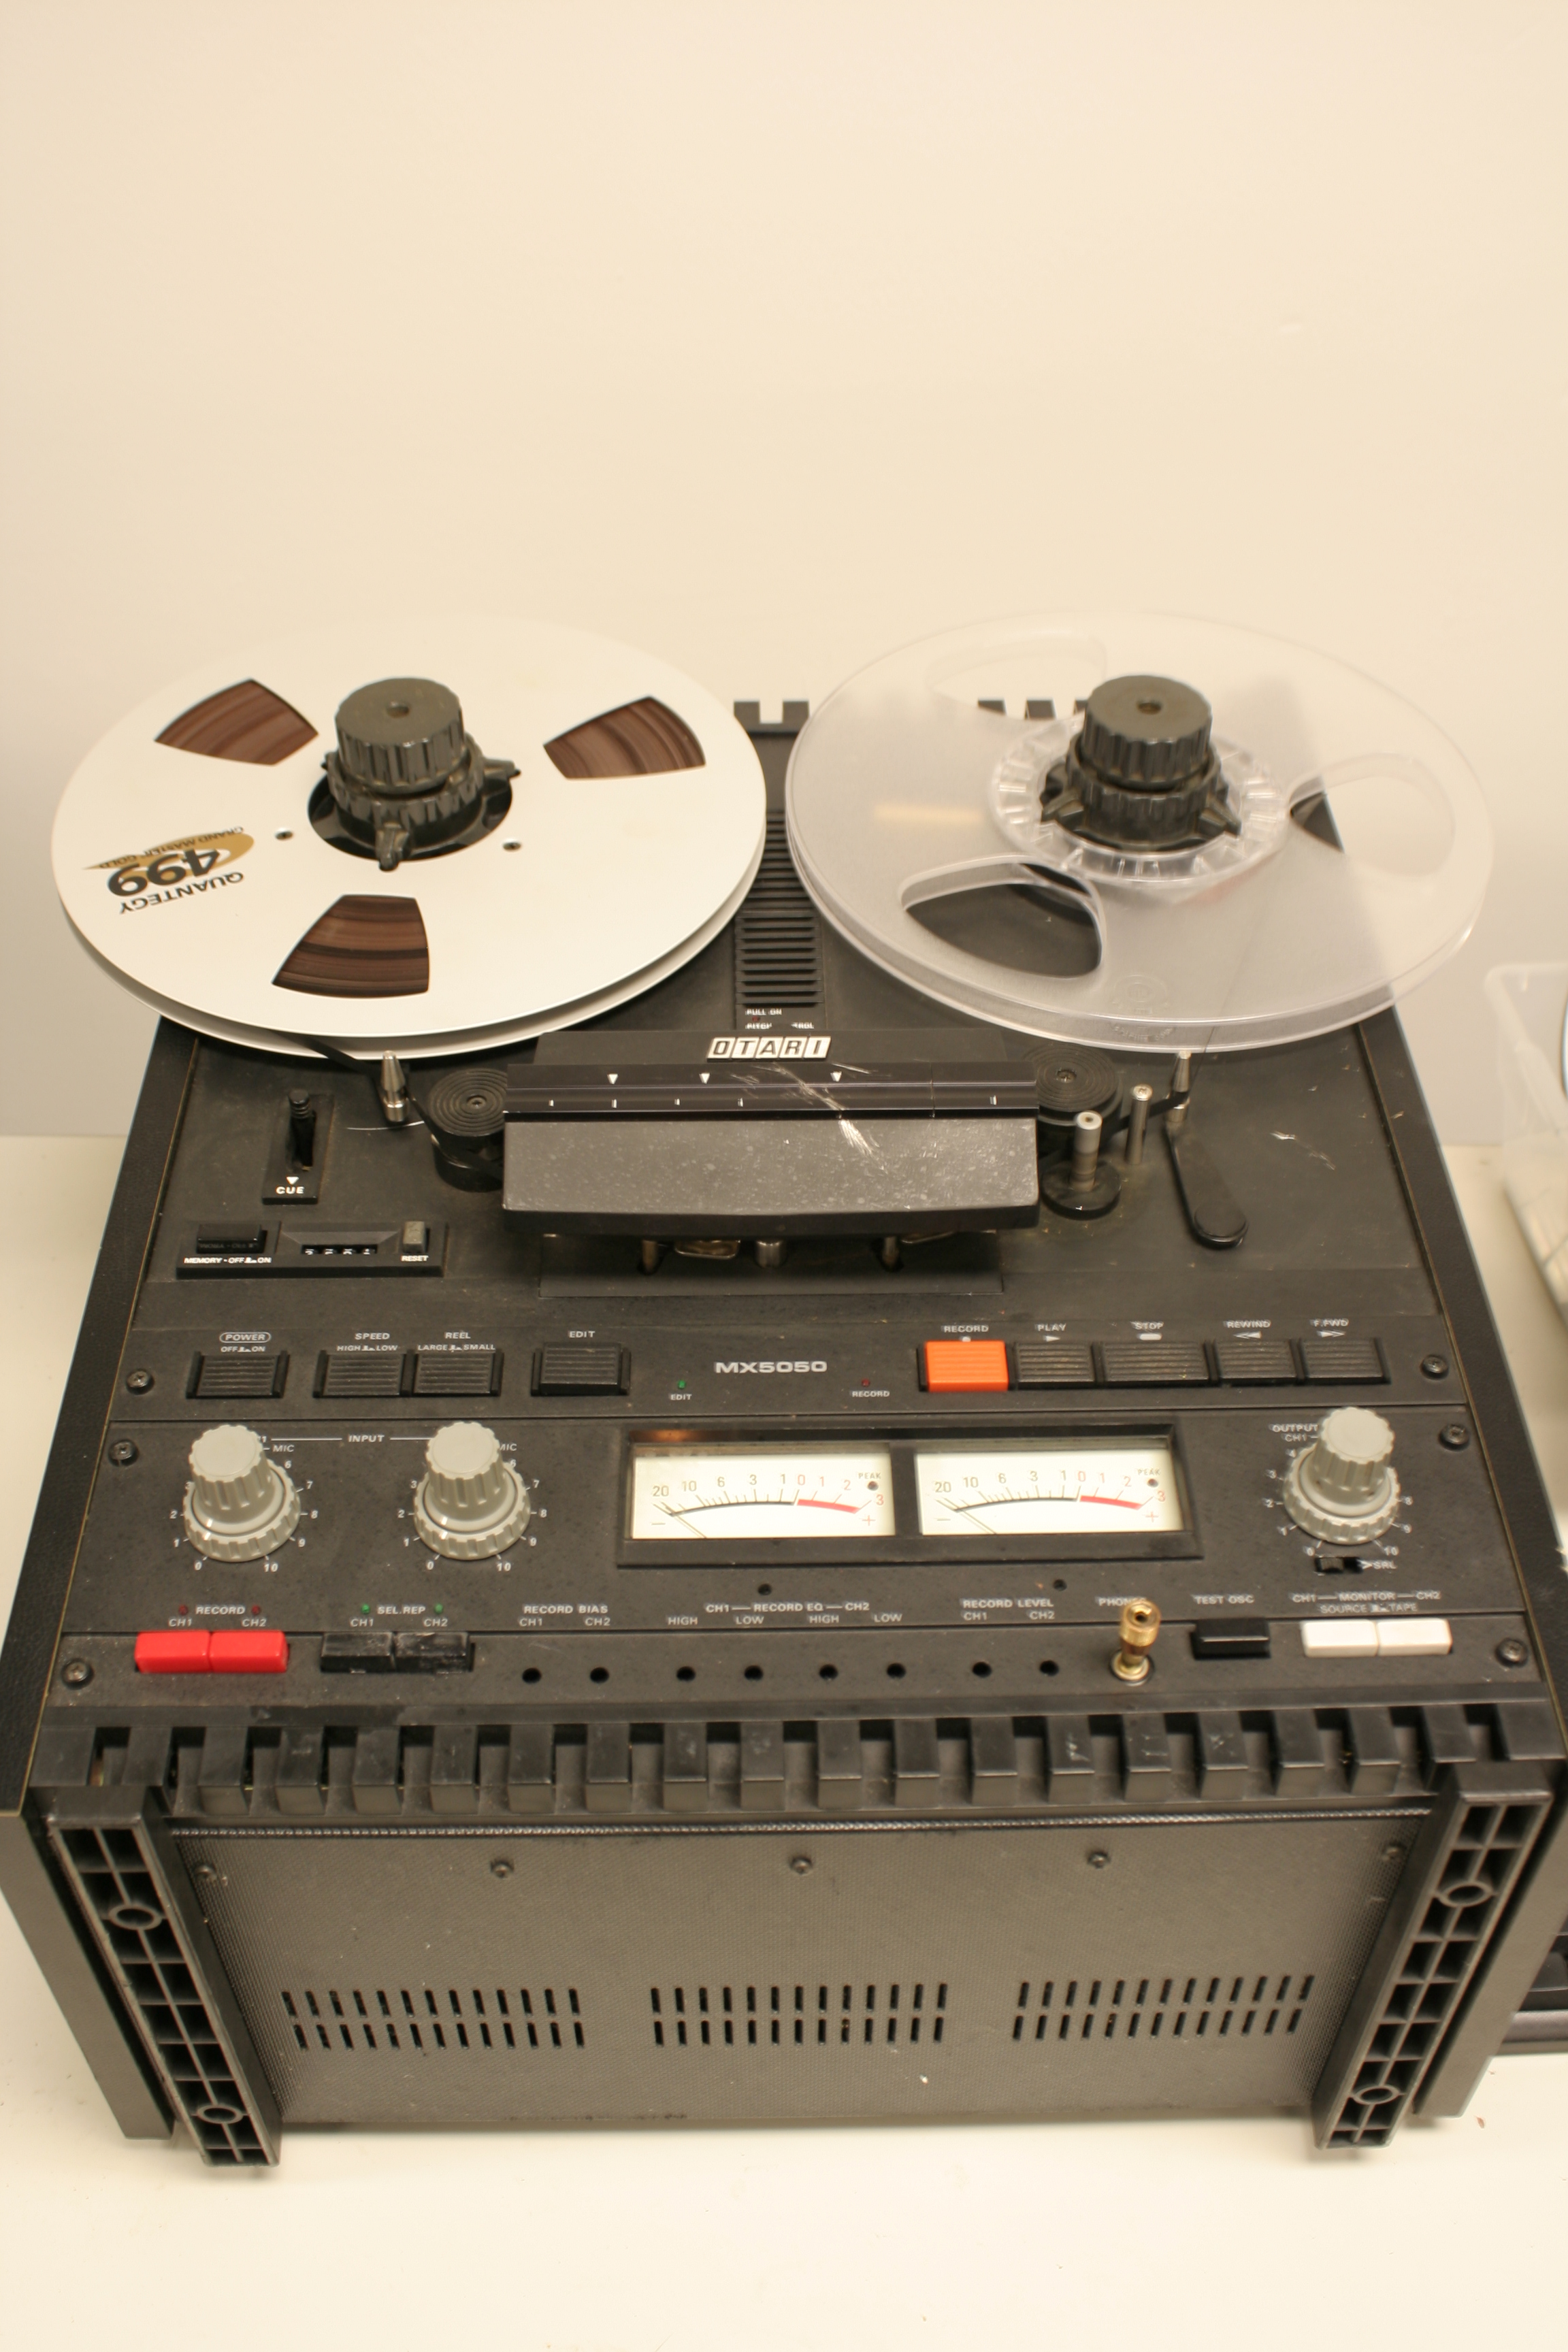 Convert Reel-to-Reel Tape to Digital and CD - EachMoment